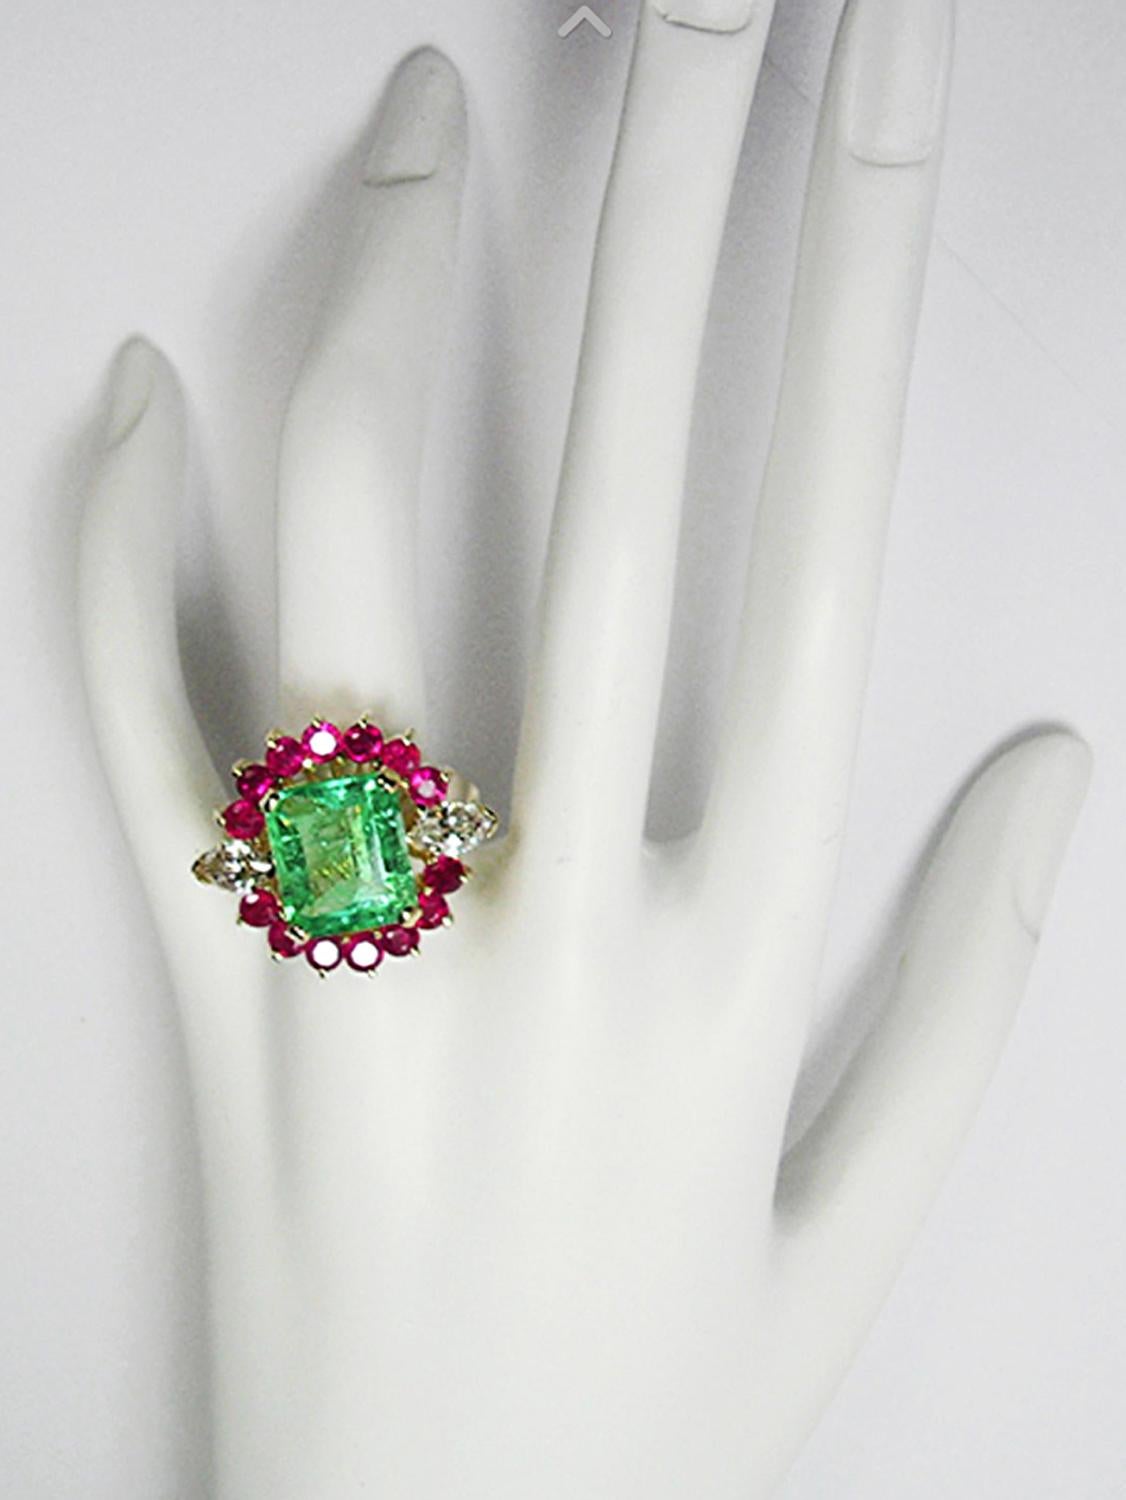 EGL USA Certified 7.14 Carat Emerald Diamond & Ruby Cluster Cocktail Ring  For Sale 1